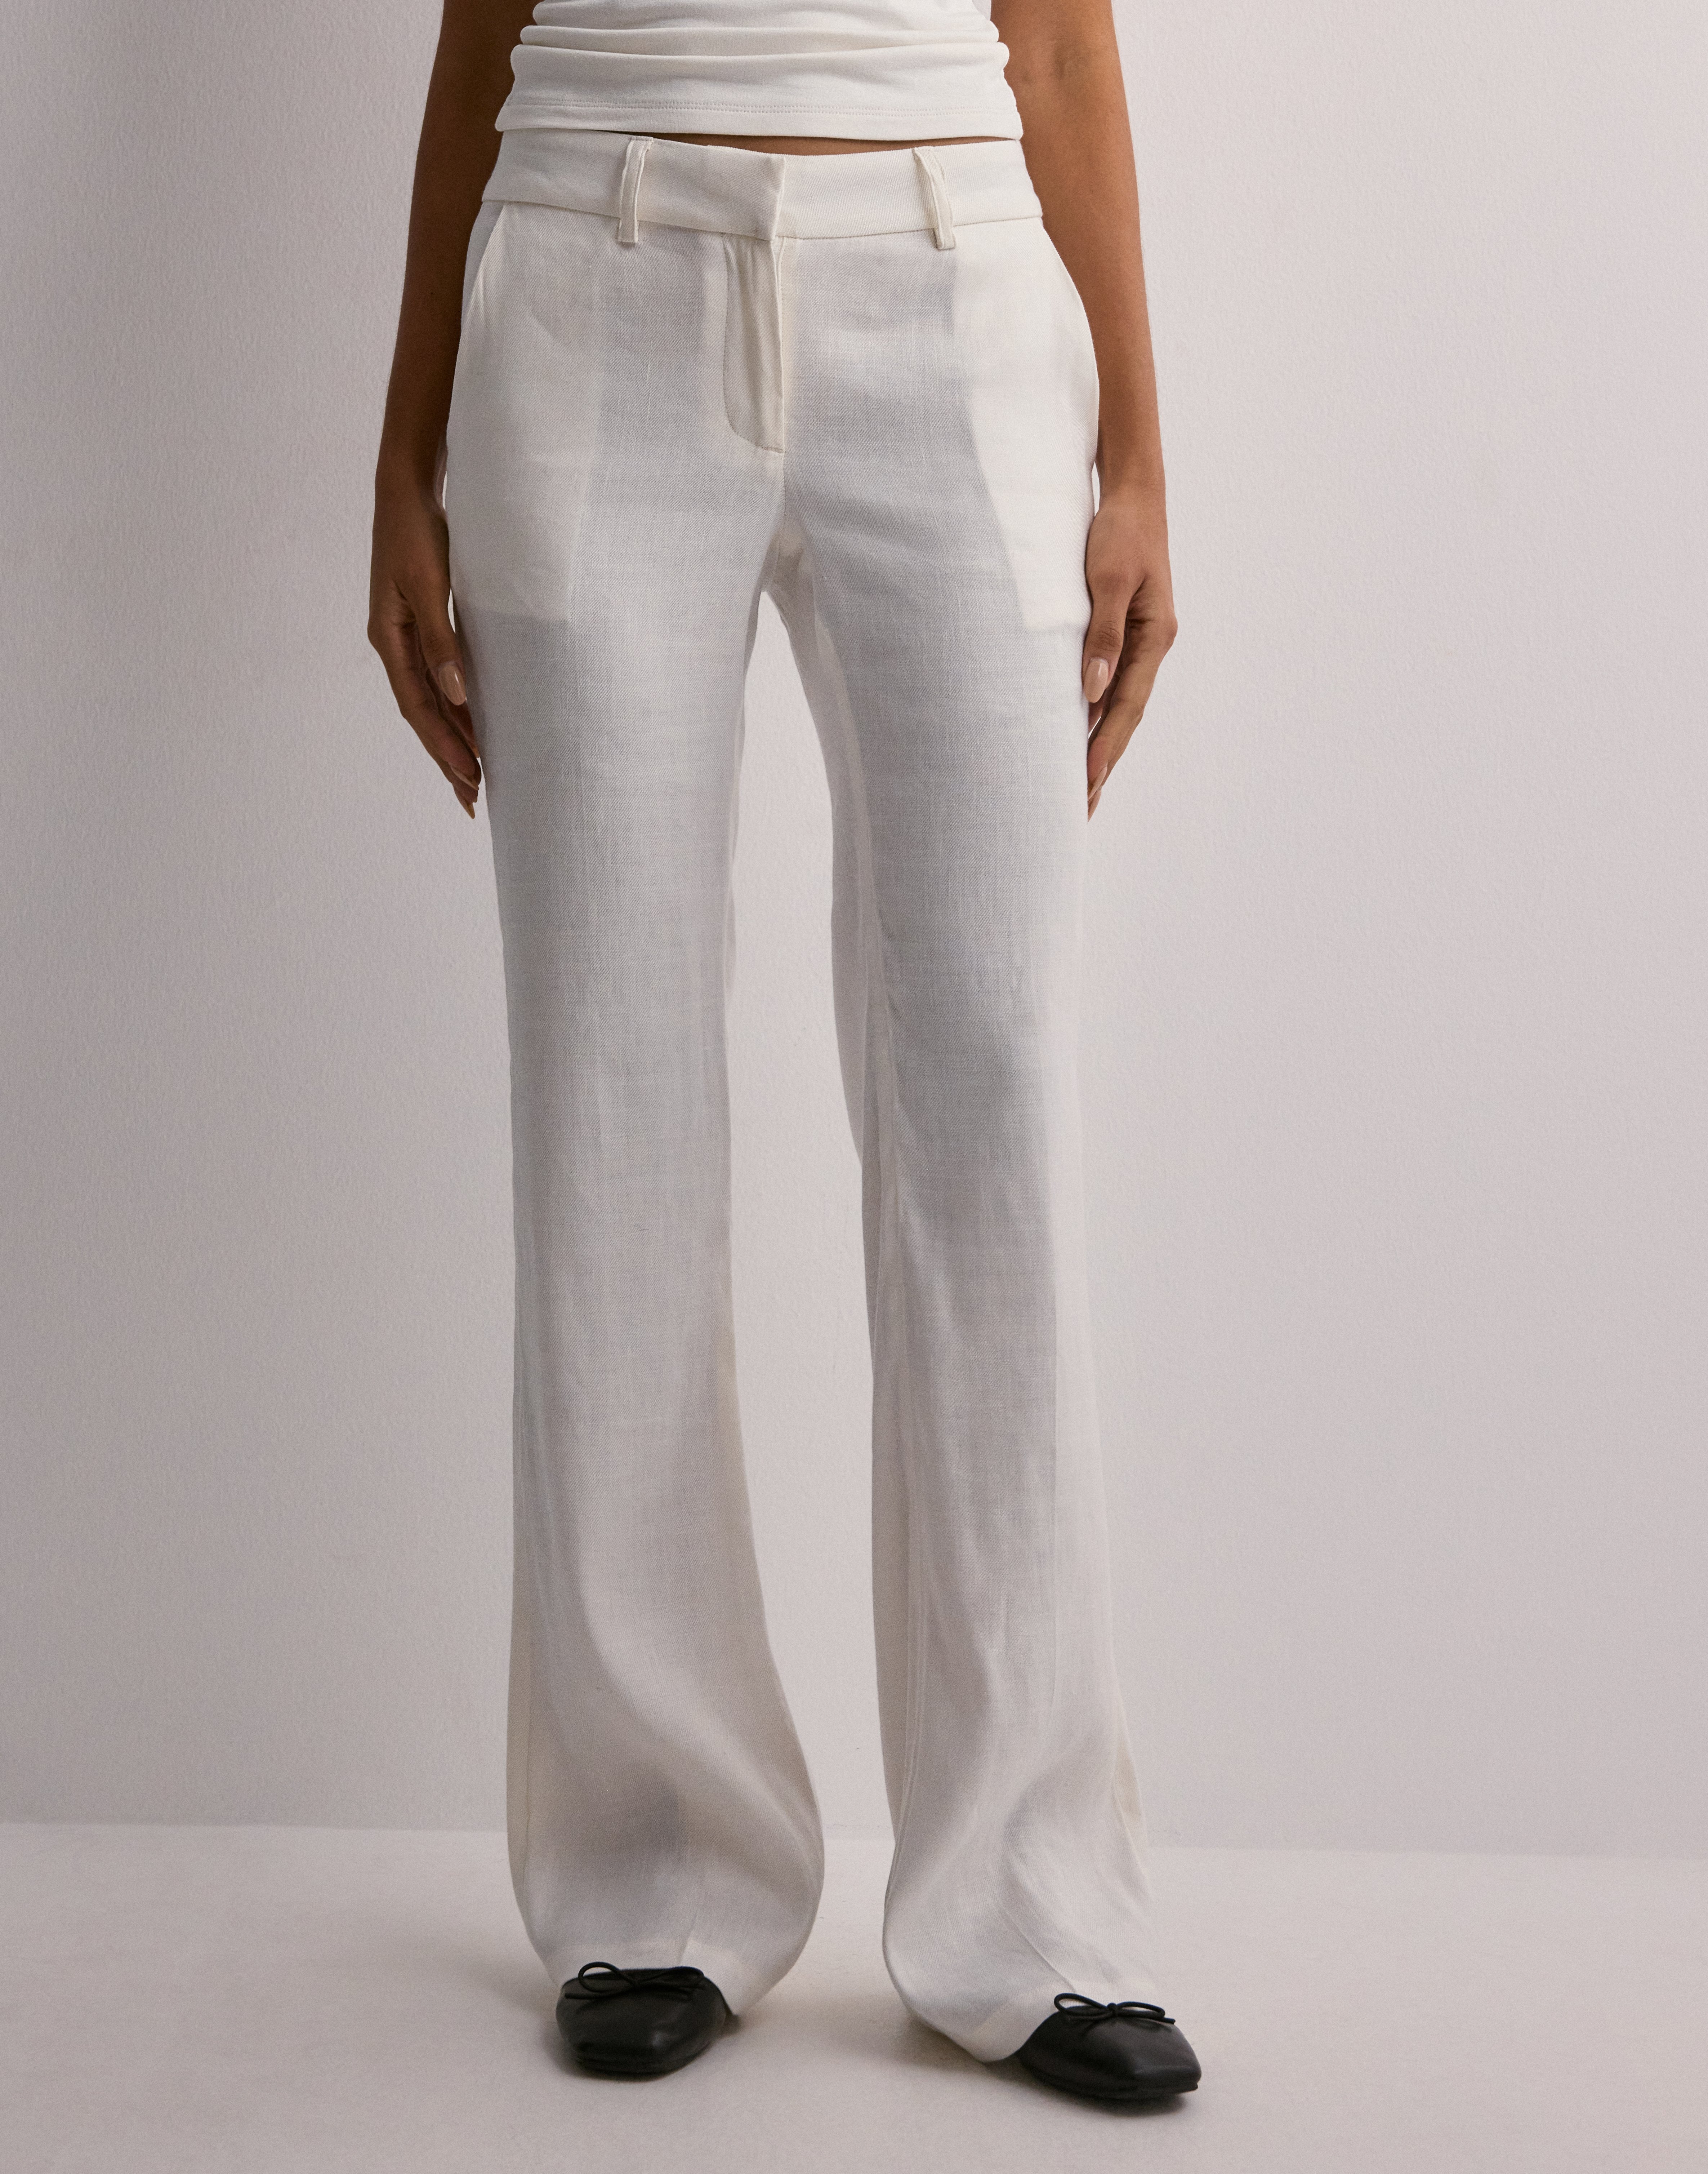 Mid-rise flared linen pants